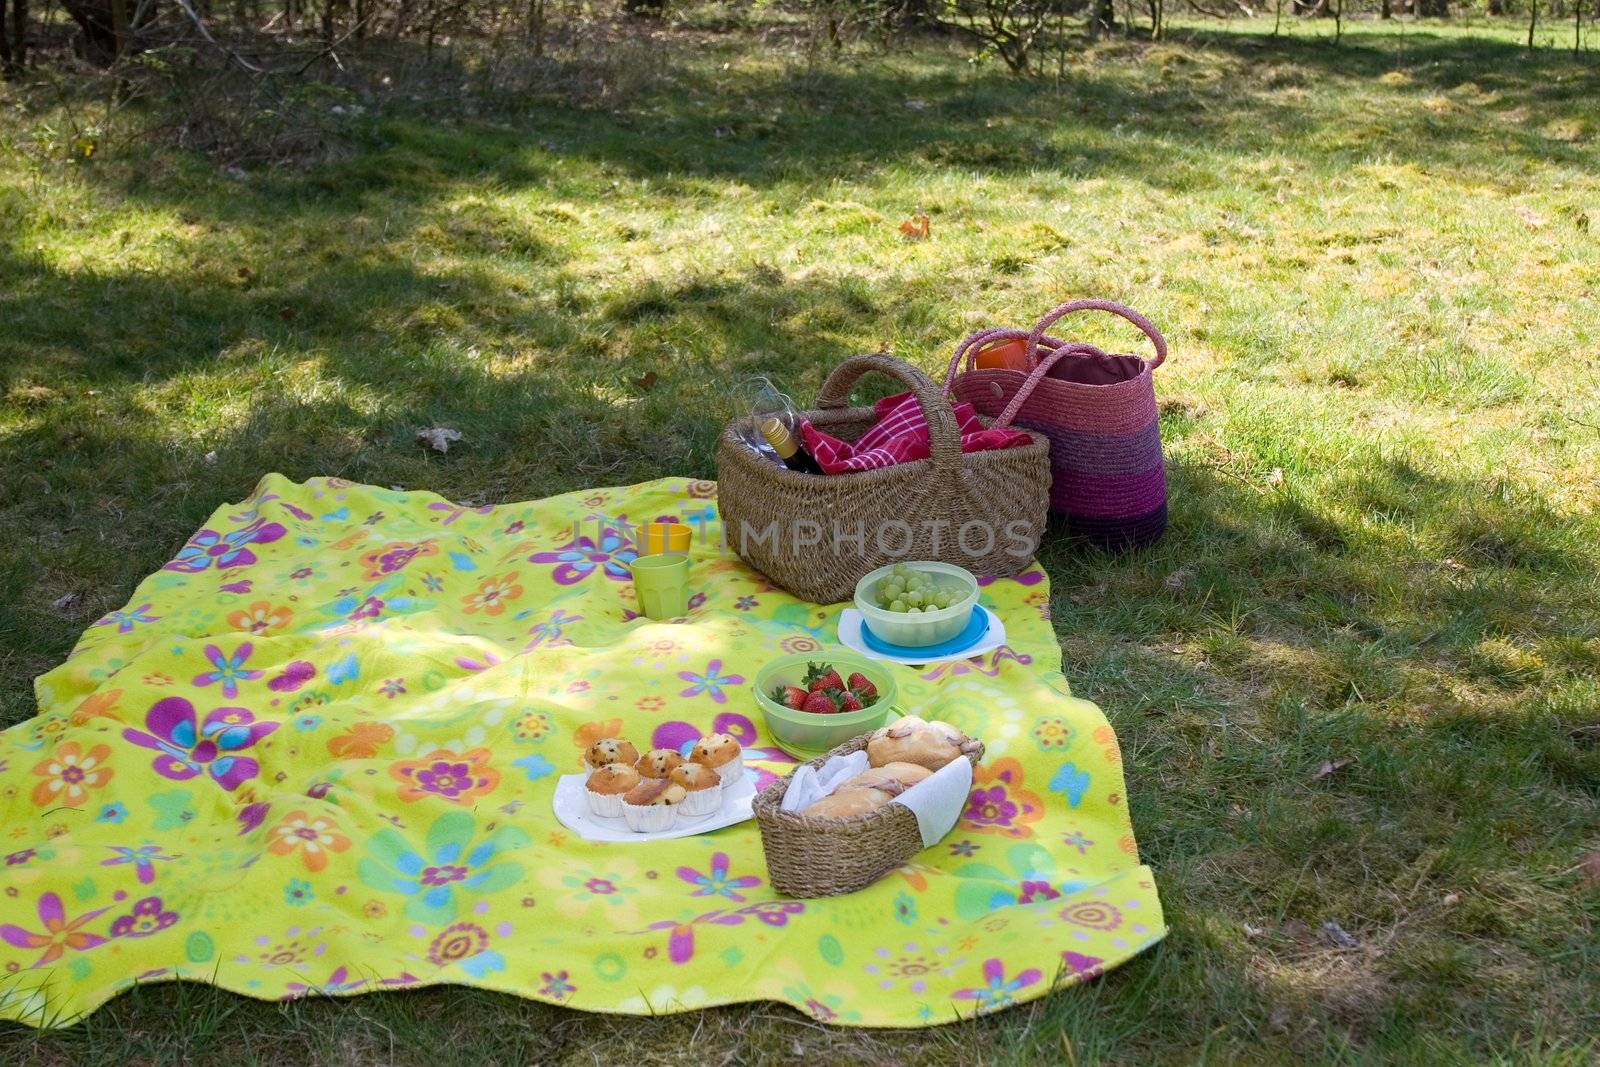 Colourful picnic blanket in the shade of a tree on a warm summerday